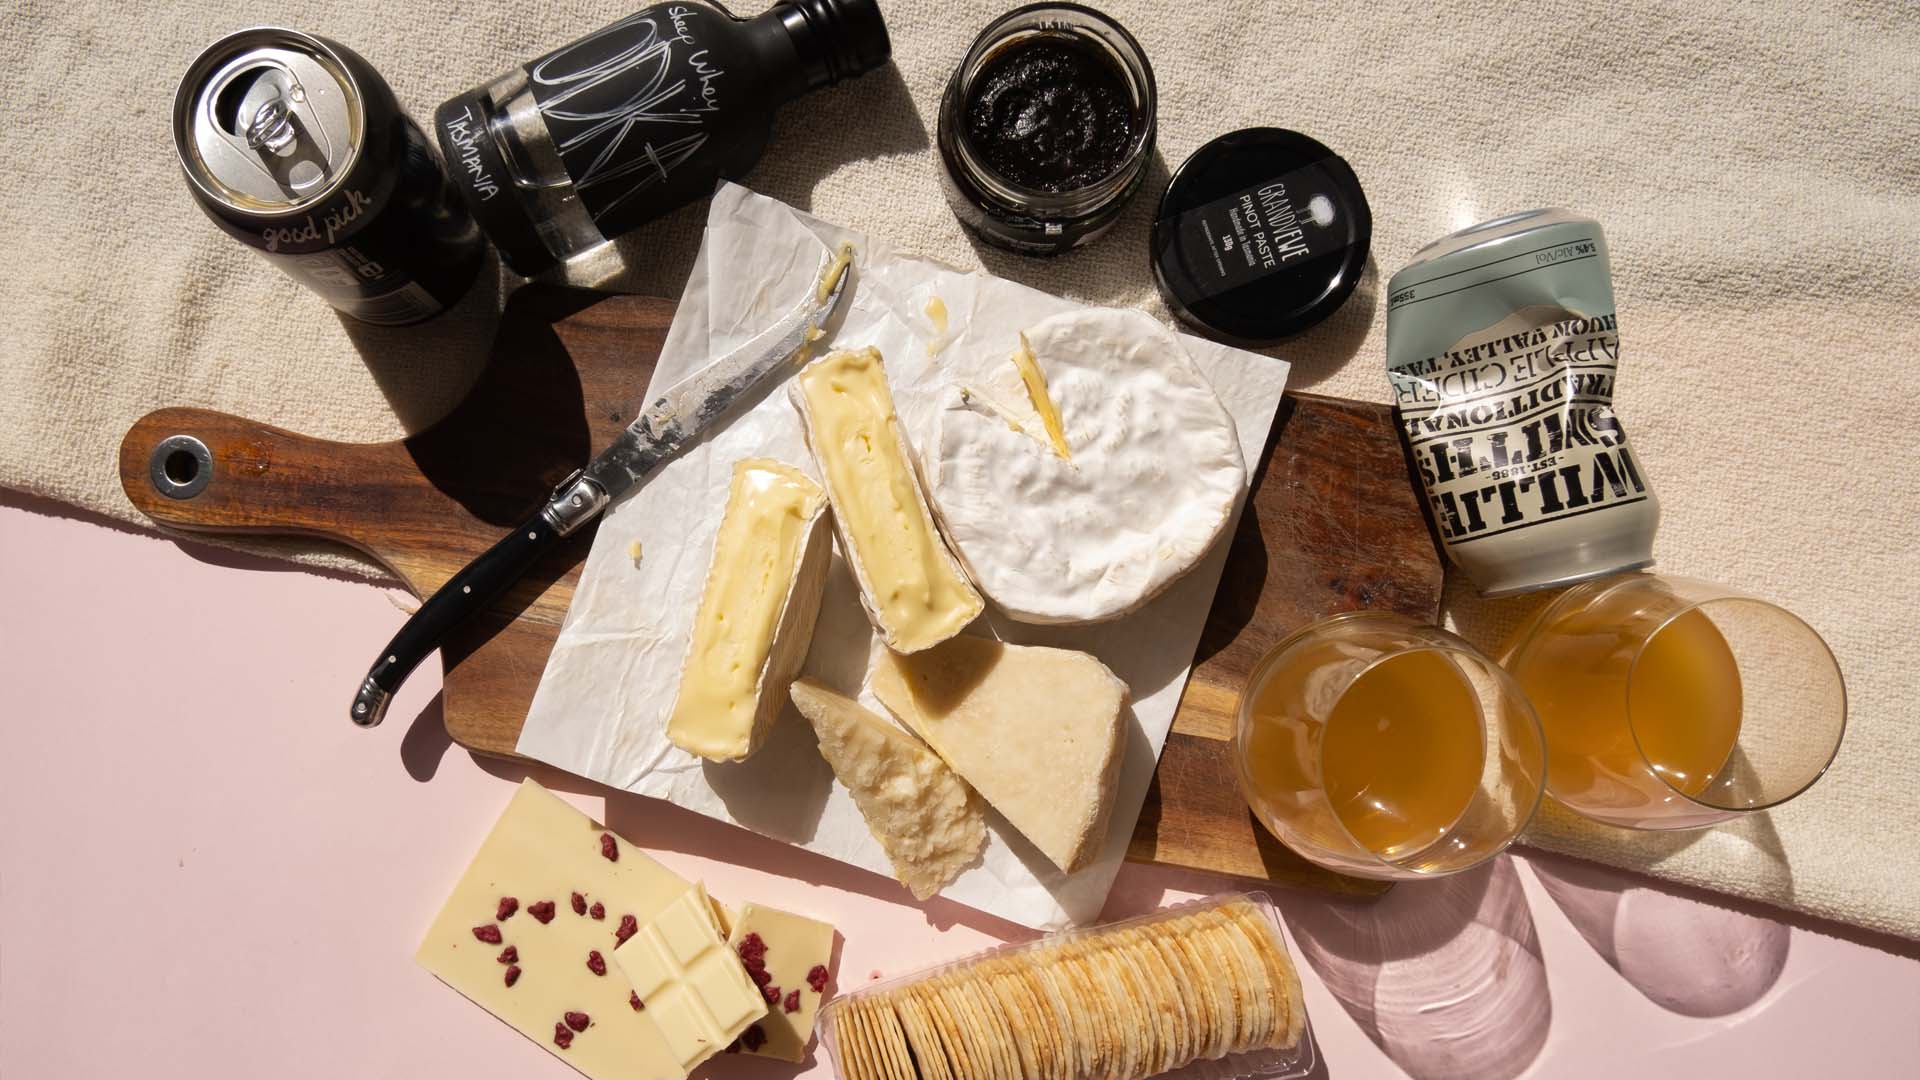 Cheese subscription gift including brie, pinot paste and cider on a wooden board